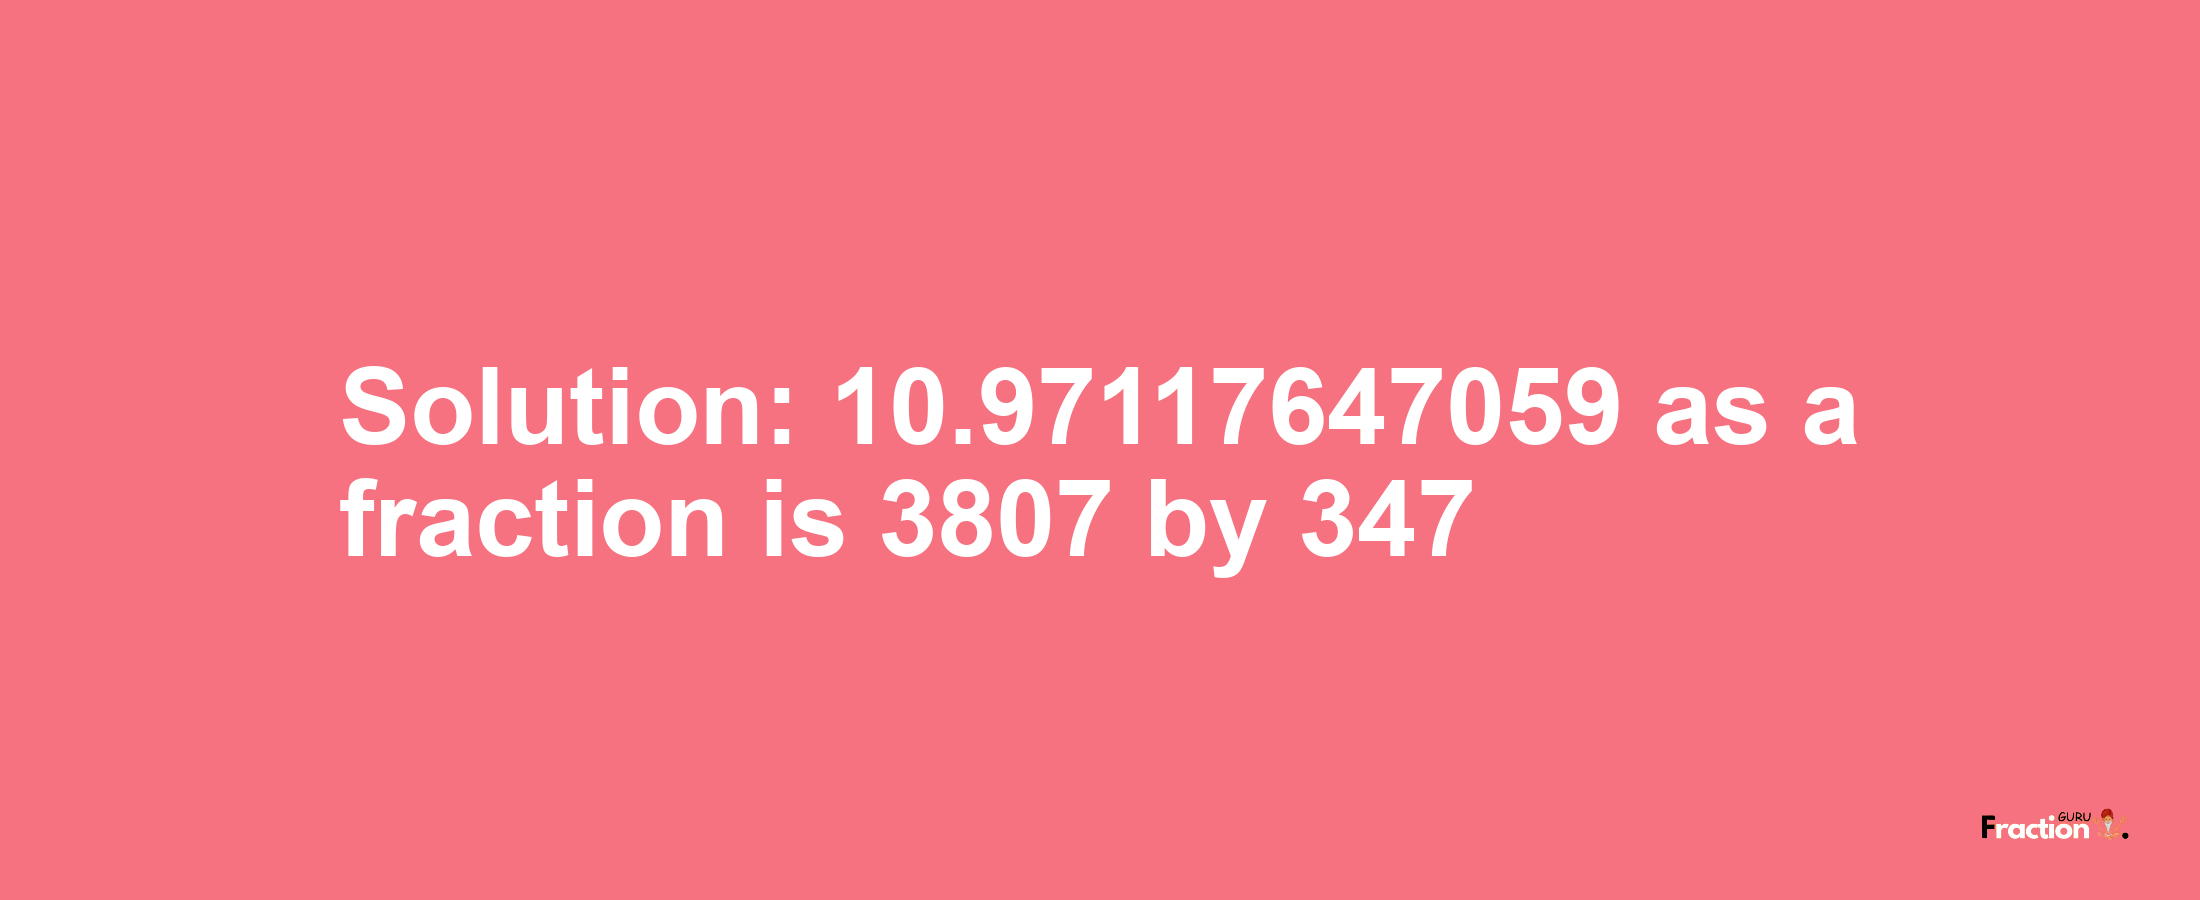 Solution:10.97117647059 as a fraction is 3807/347